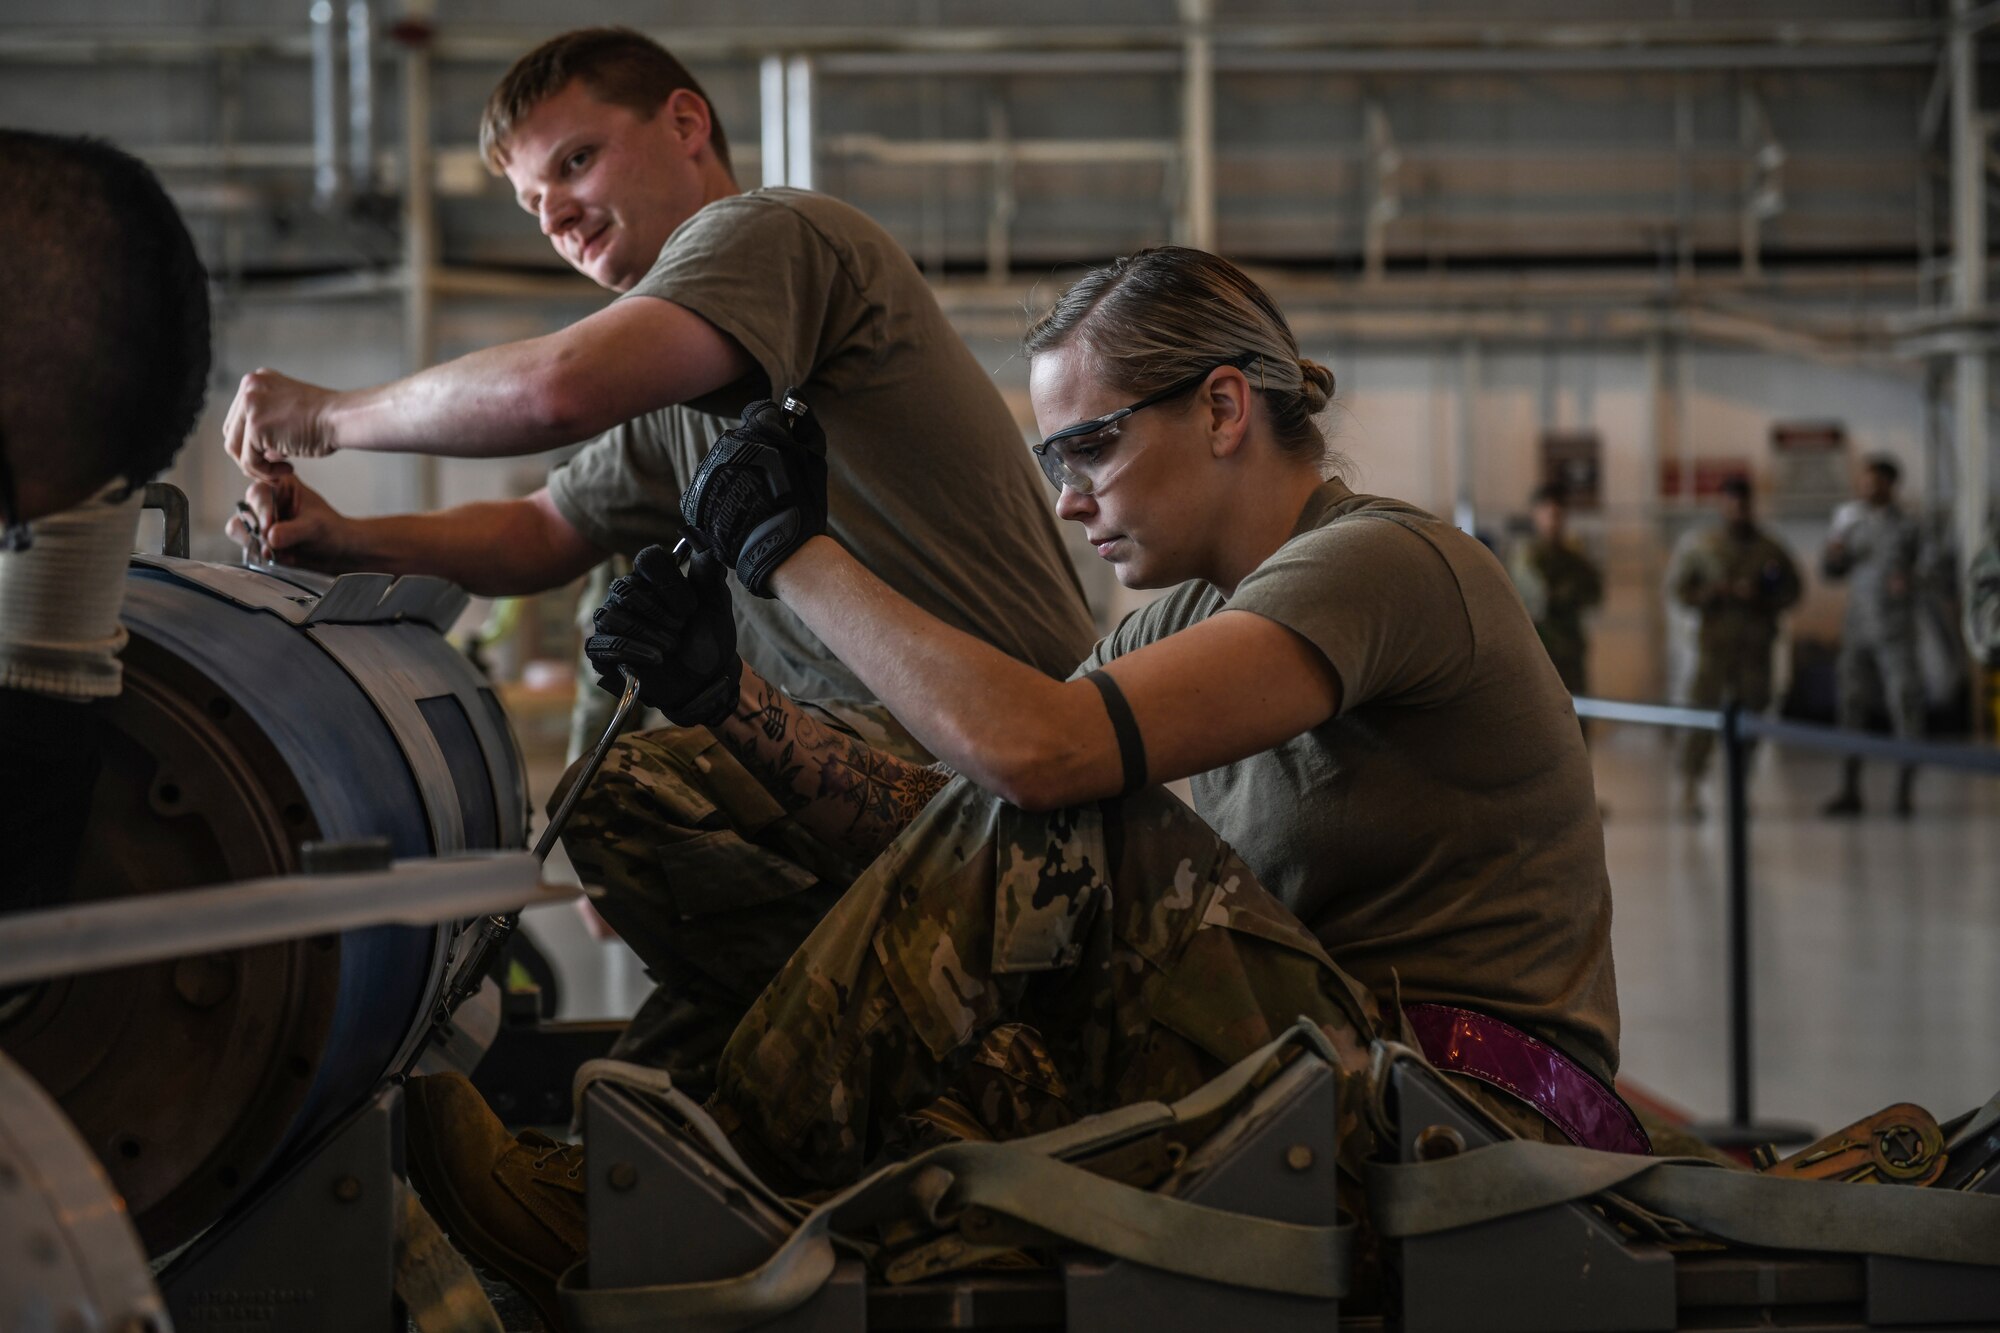 U.S Airmen from the 31st Munition Squadron conduct an inert bomb build at Aviano Air Base, Italy, Oct. 31, 2019. The Rapid Aircraft Generation and Employment competition is the first of its kind and will be held quarterly at Aviano AB. (U.S. Air Force photo by Airman 1st Class Ericka A. Woolever).